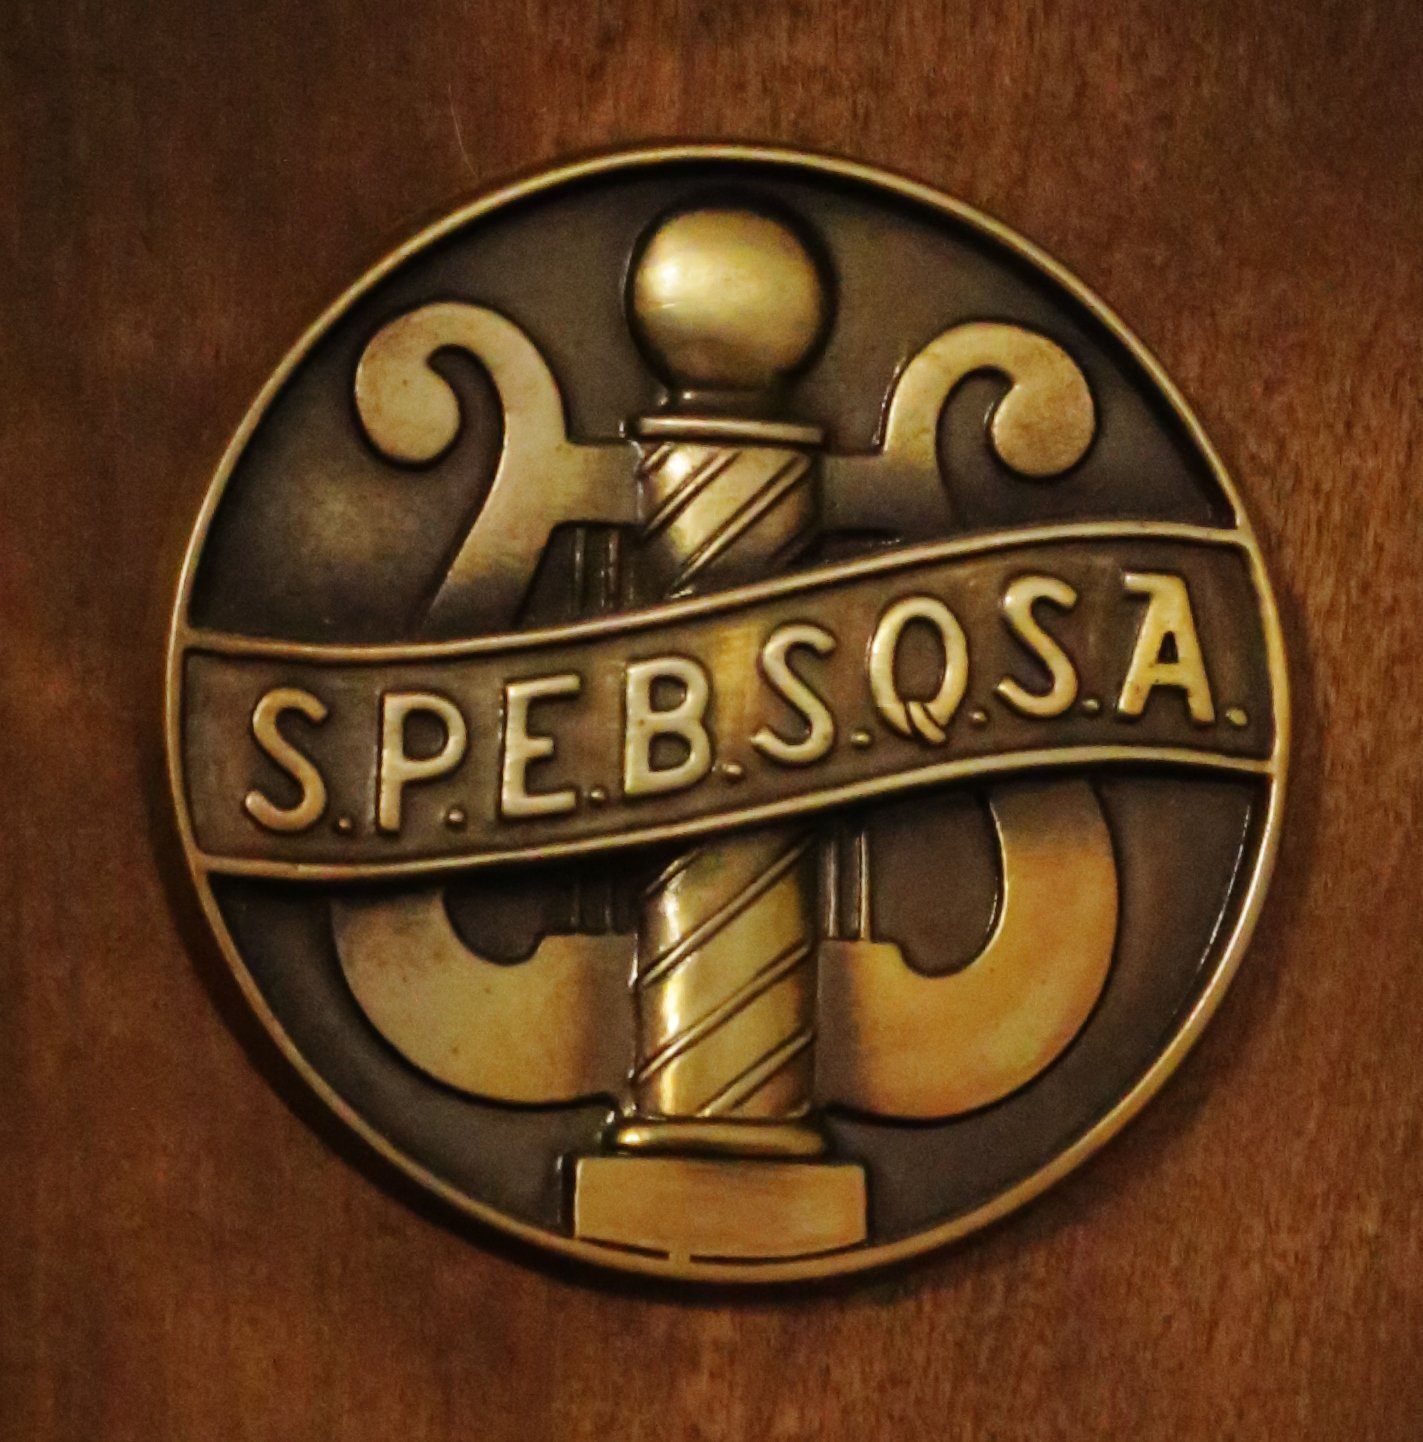 Crest of the Society for the Preservation and Encouragement of Barber Shop Quartet Singing in America (SPEBSQSA).